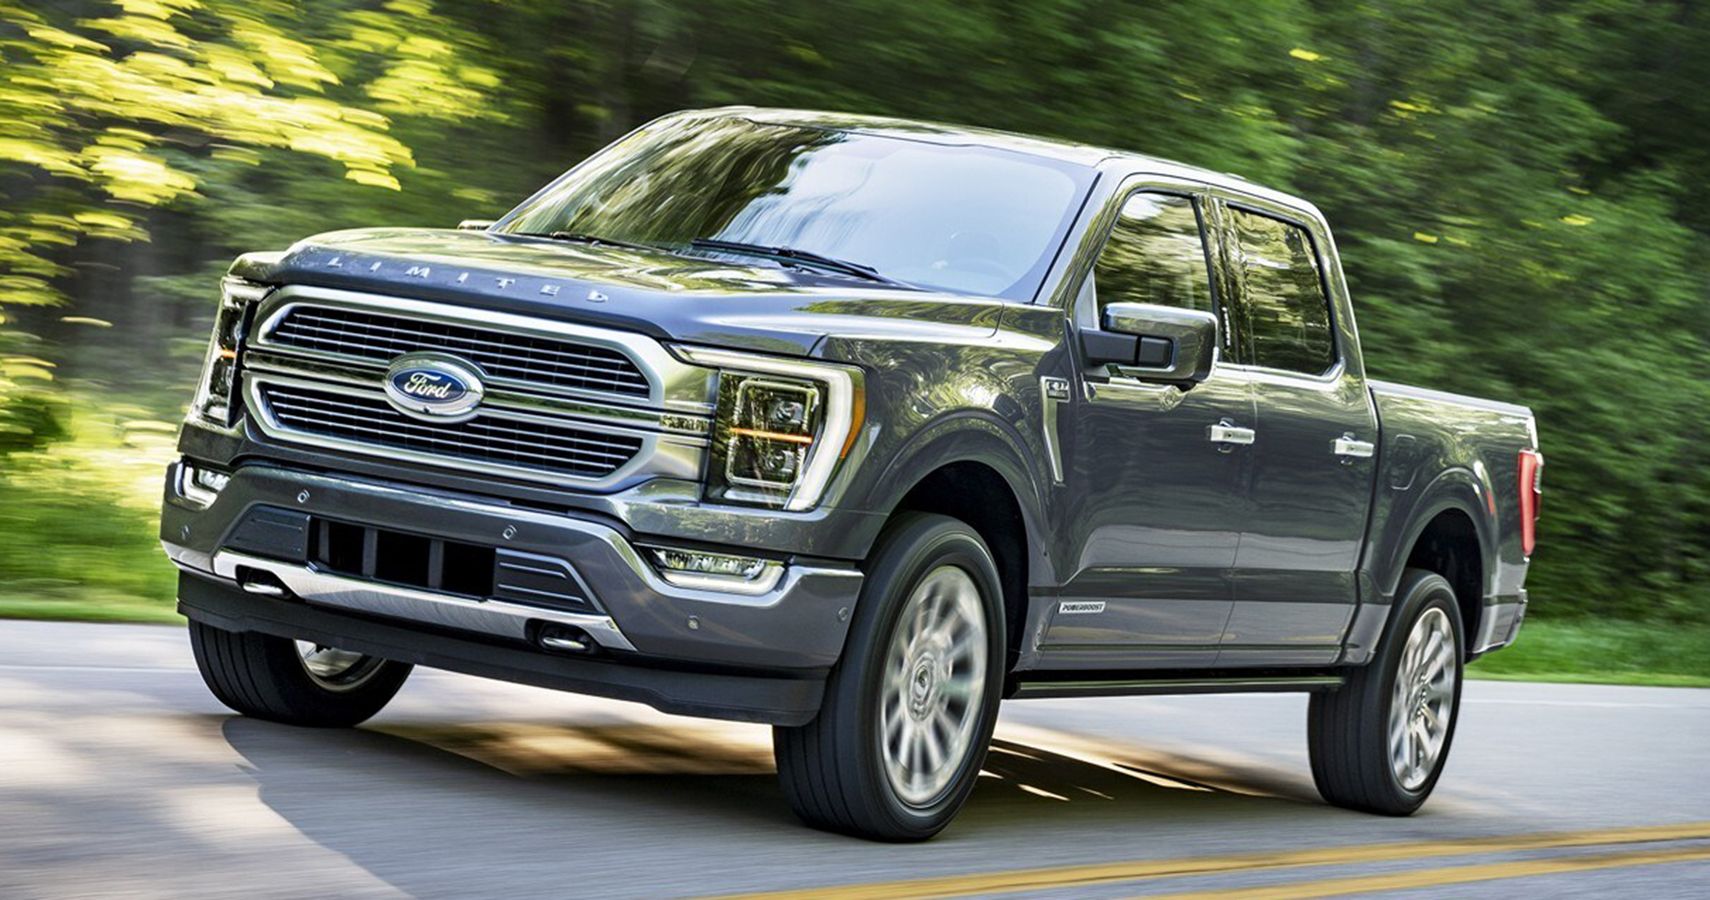 Gray 2022 Ford F-150 Cruising On The Road